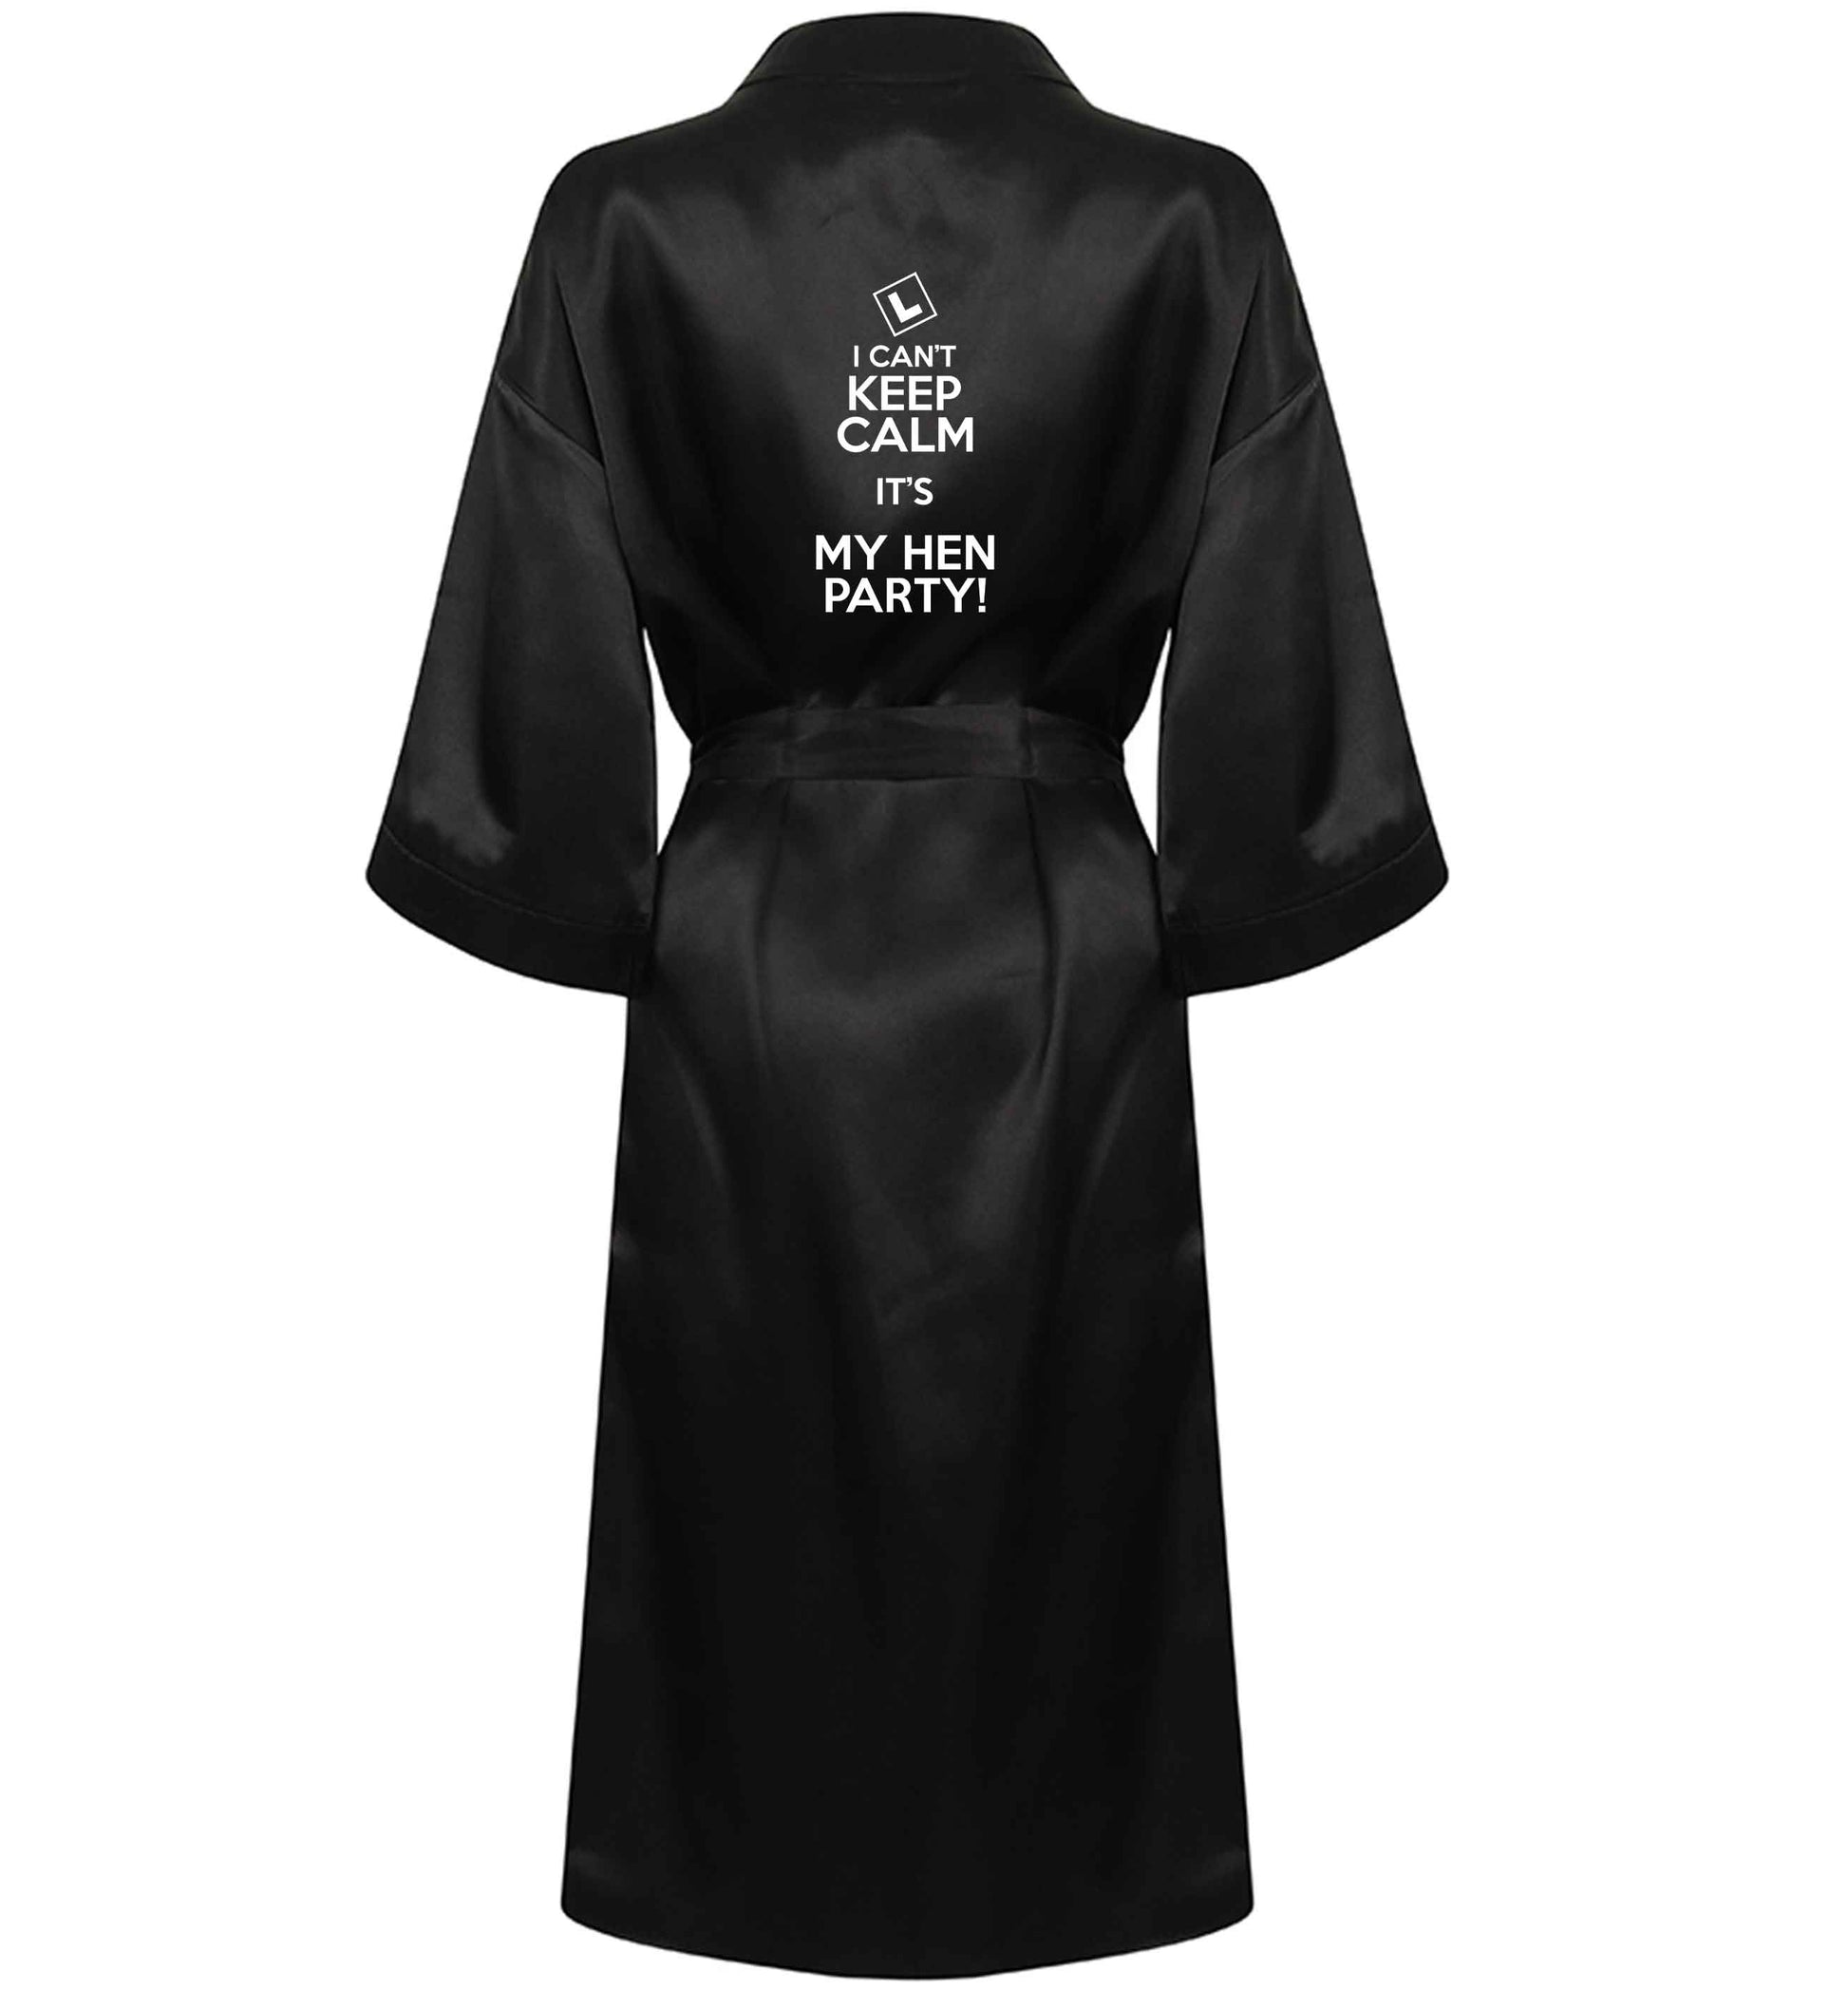 I can't keep calm it's my hen party XL/XXL black ladies dressing  gown size 16/18